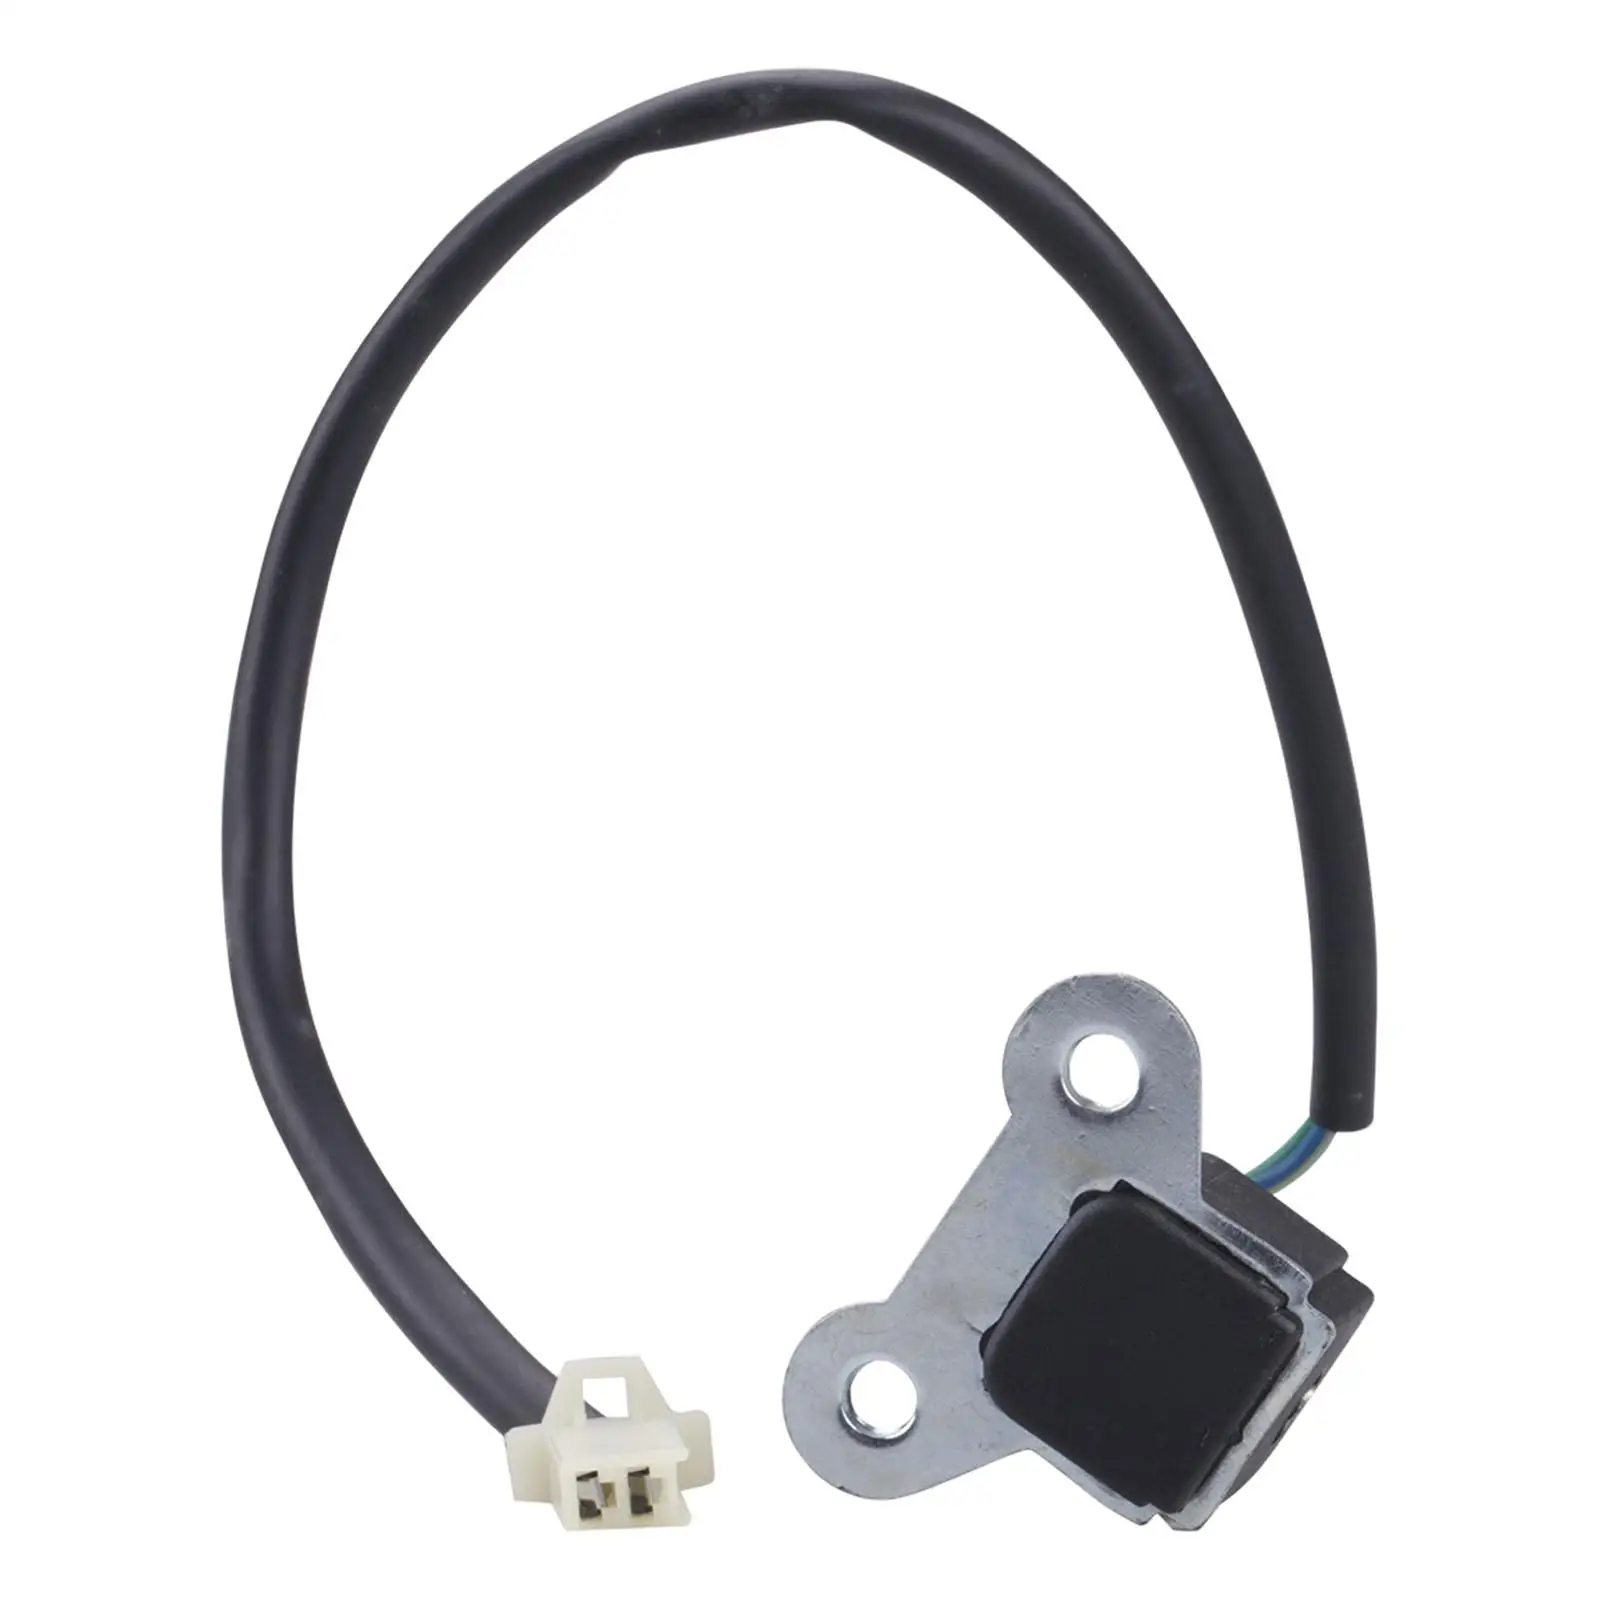 Coil Igniter Stator Toggle, Pulse Ignition Sensor, Water Cooled for CH250 Gy6 250cc Scooter ATV, Moped